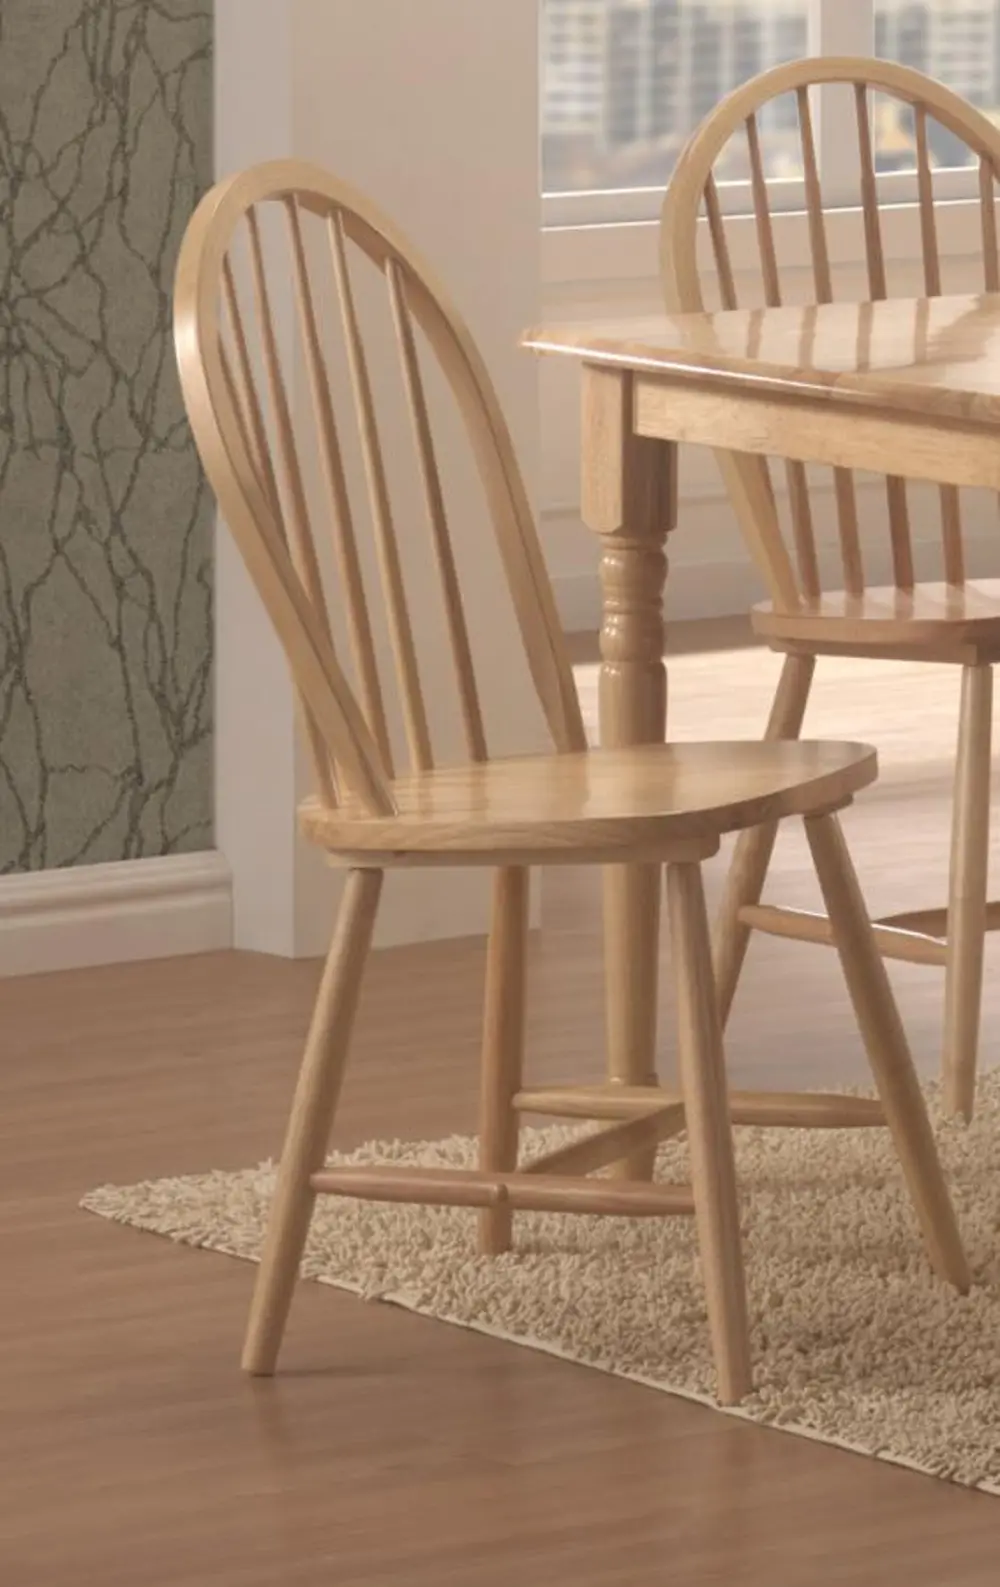 Set of 4 Country Natural Wood Dining Room Chairs - Afonso-1